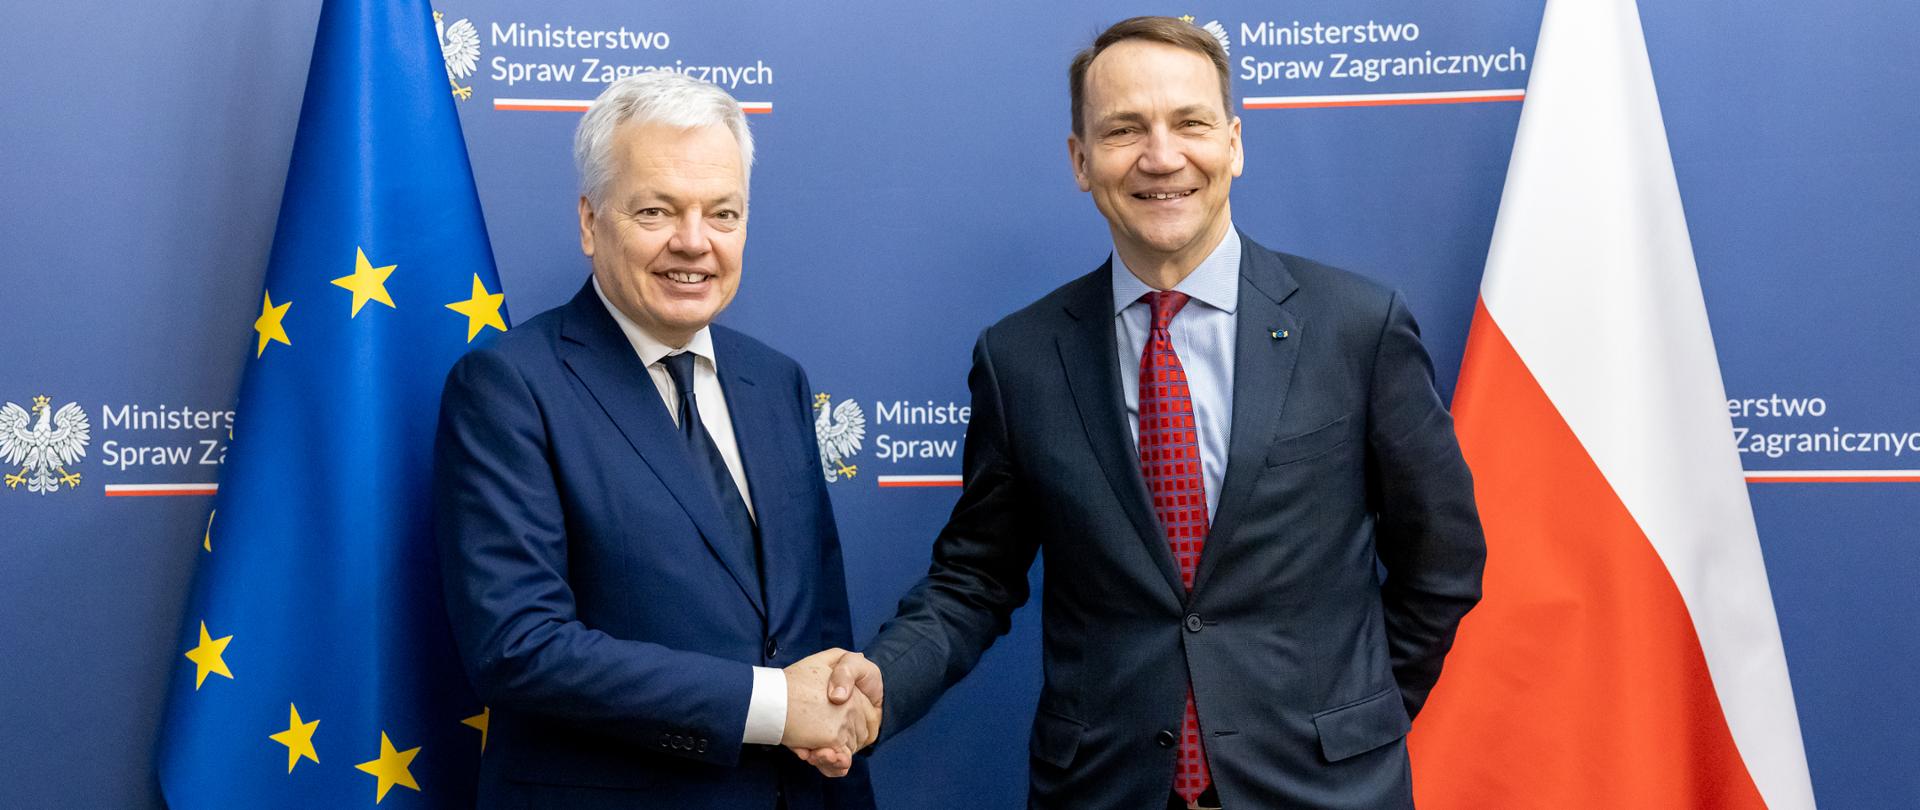 Minister Radosław Sikorski welcomed Commissioner for Justice Dider Reynder at the Ministry of Foreign Affairs